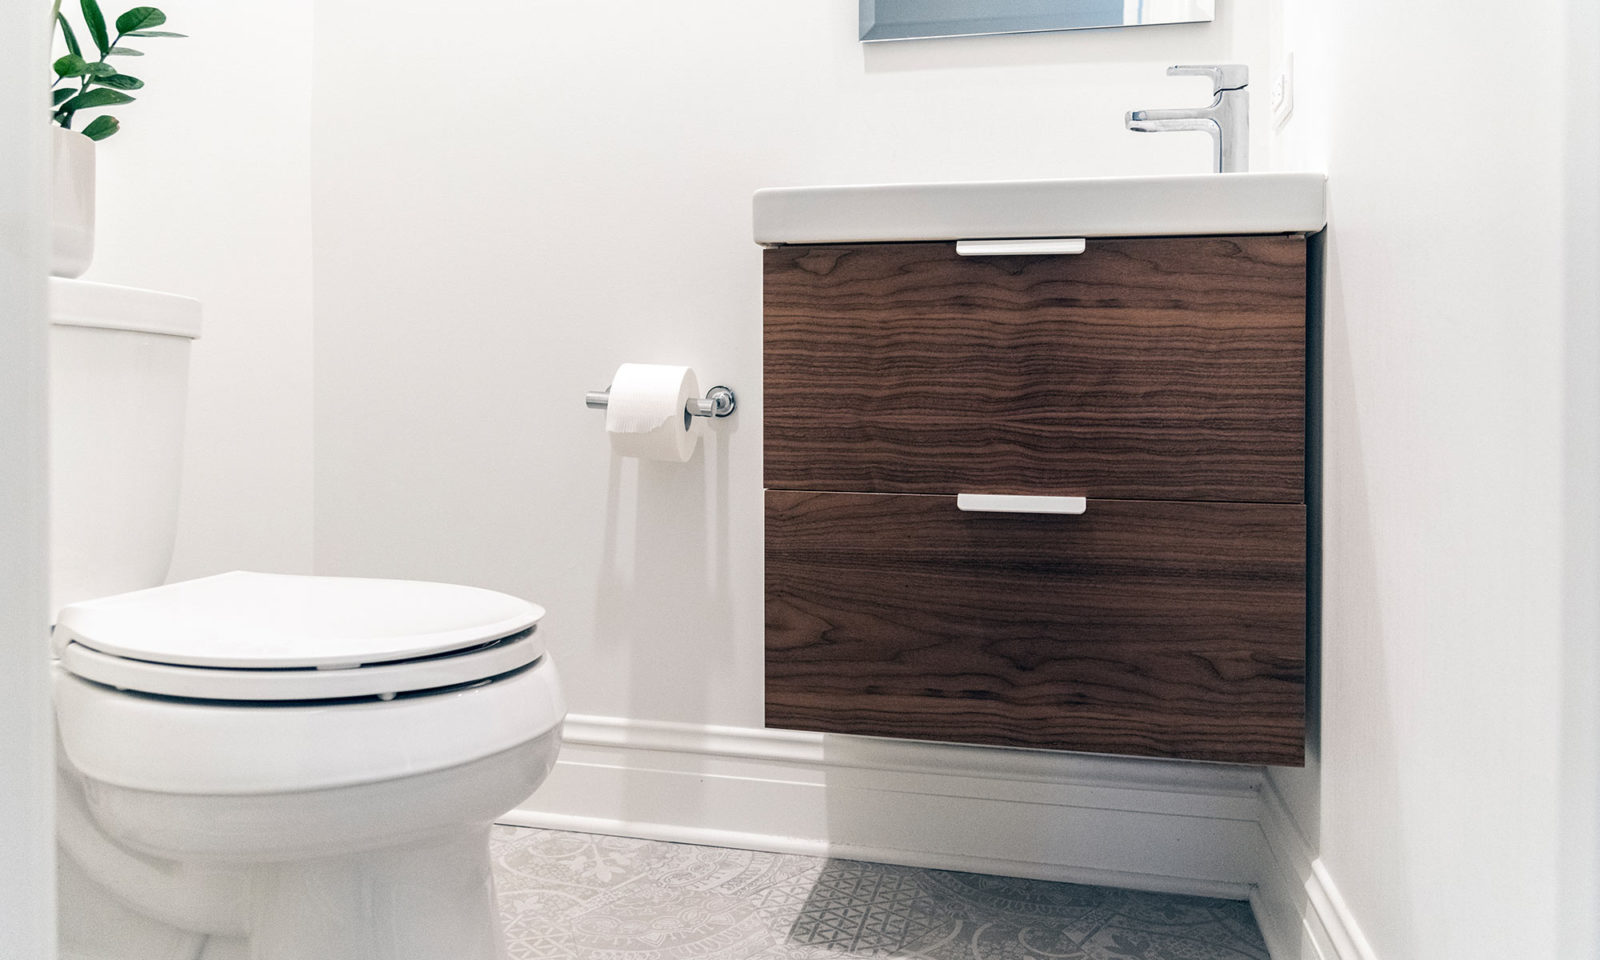 Newly renovated bathroom with white walls and flooring and dark wooden sink cabinet